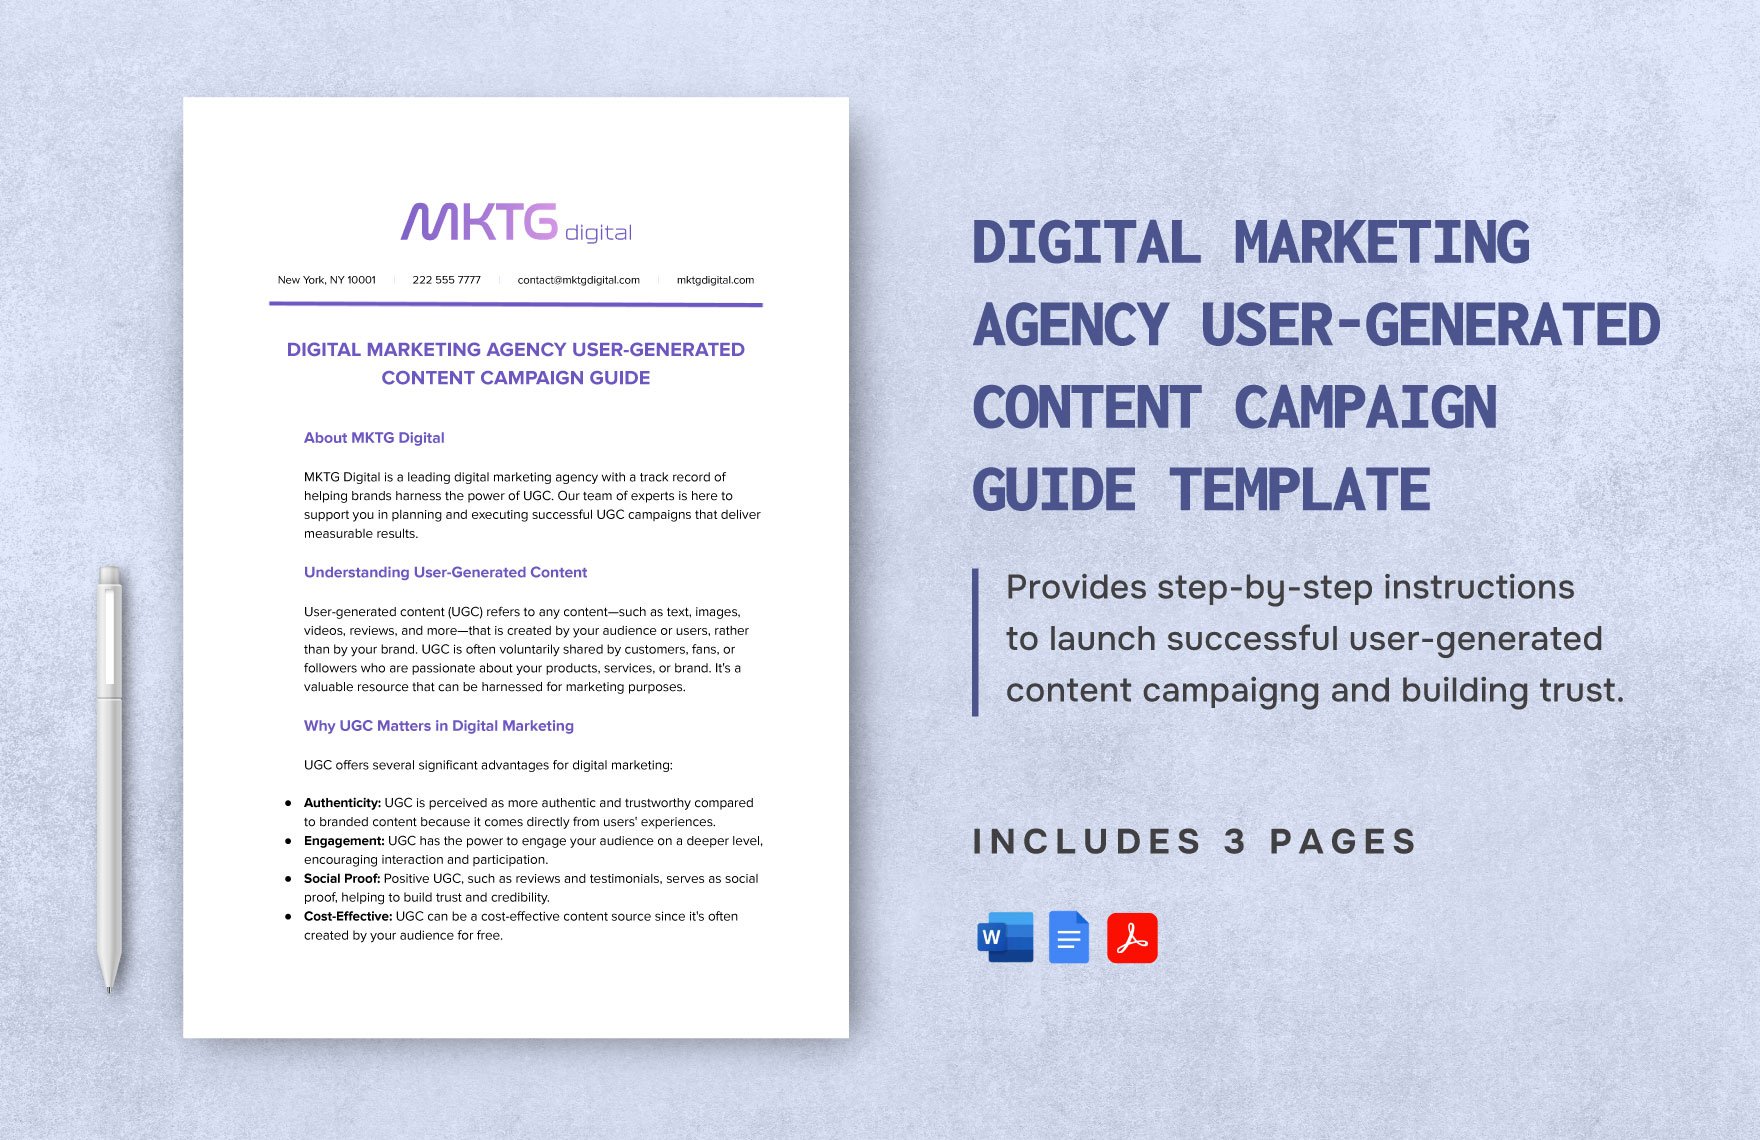 Digital Marketing Agency User-Generated Content Campaign Guide Template